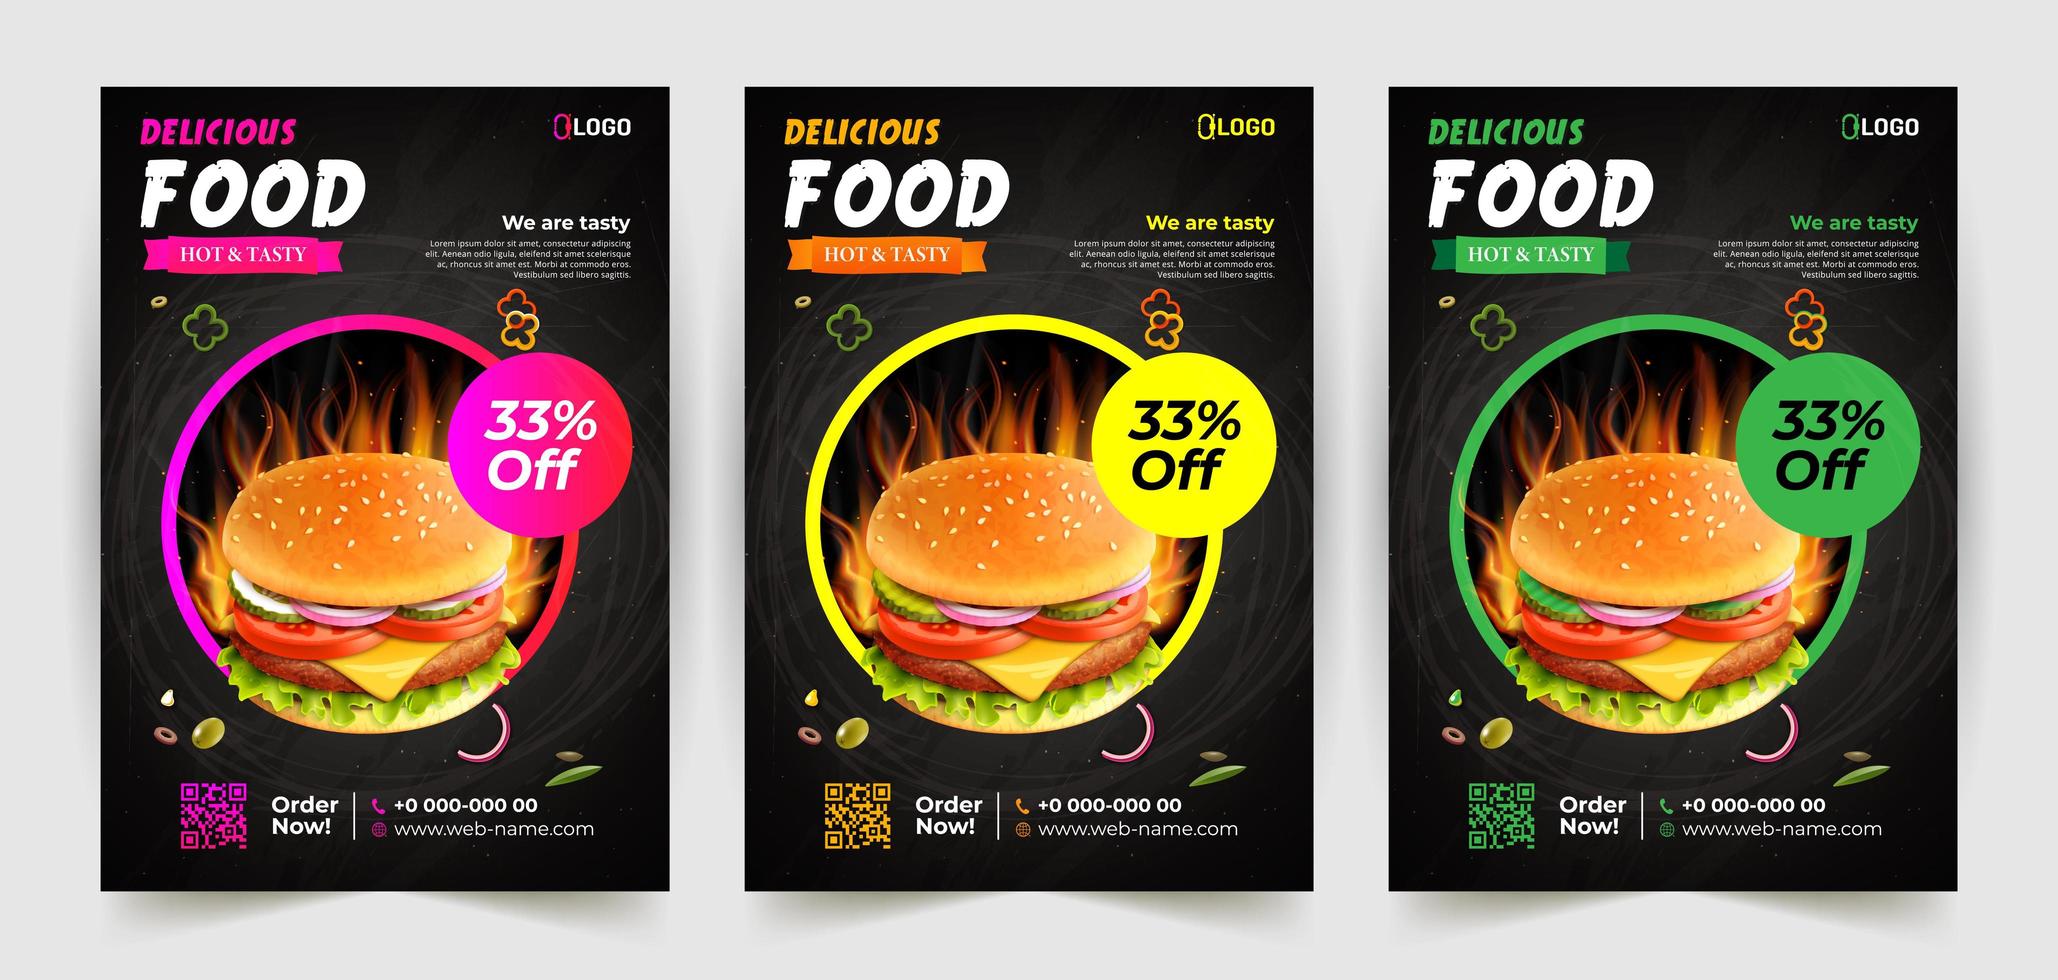 Delicious Food Flyer Design Template with Circle Frame vector